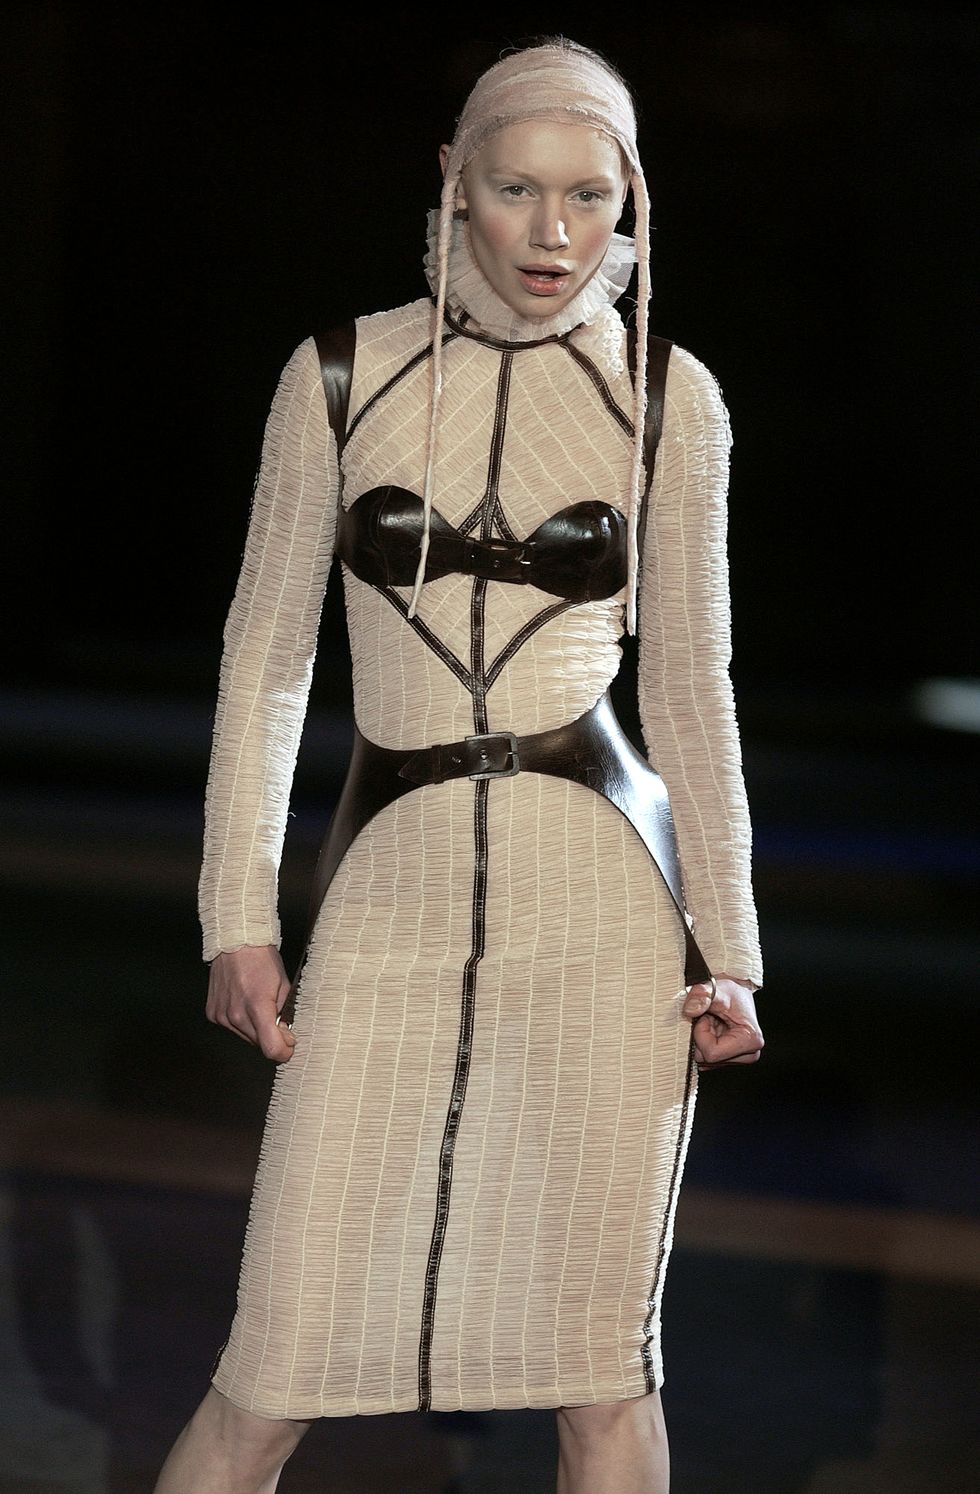 paris   march 11 uk out a model walks the runway during the alexander mcqueen ready to wear autumnwinter 200203 collection show part of paris fashion week on march 11,2002 in paris,france photo by catwalkinggetty images